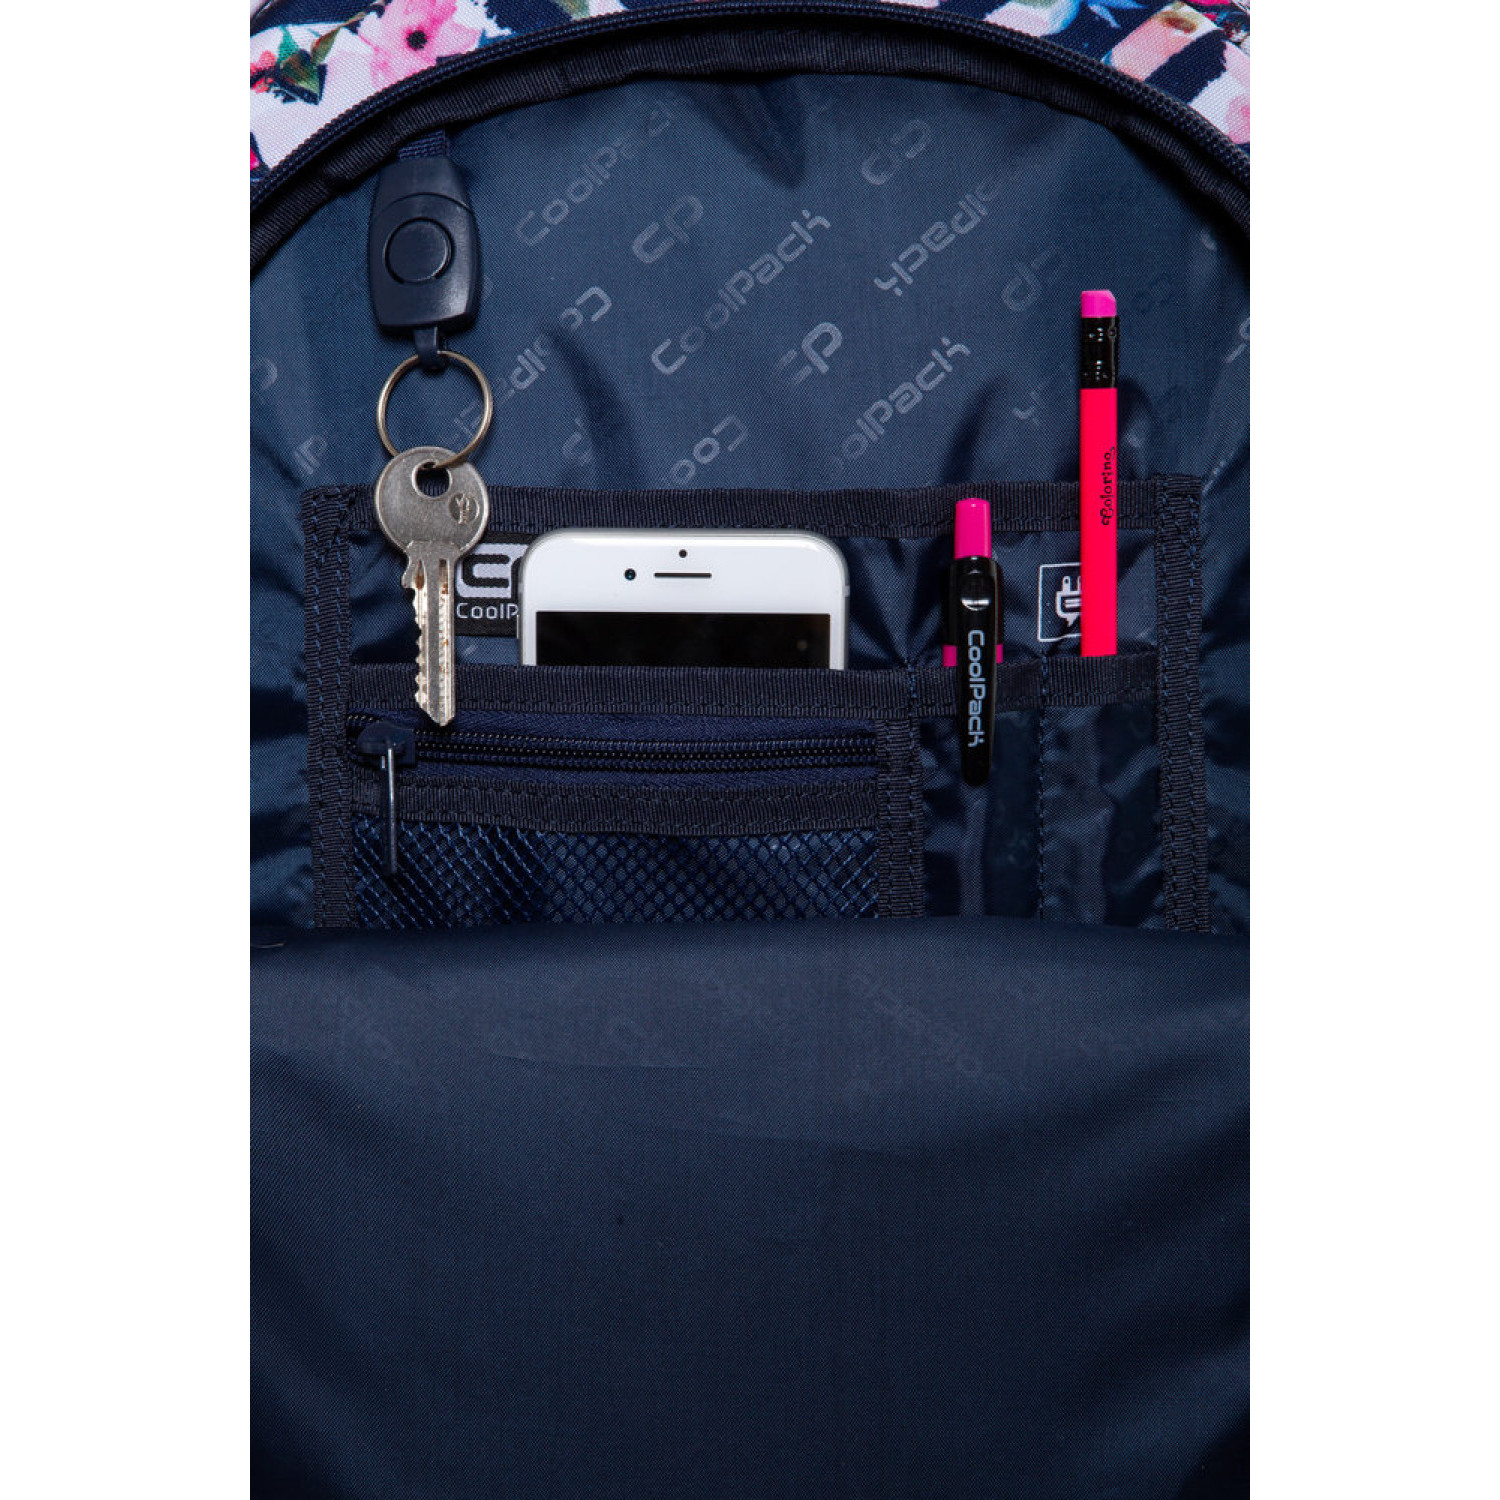 Раница Coolpack Drafter Pink Marine